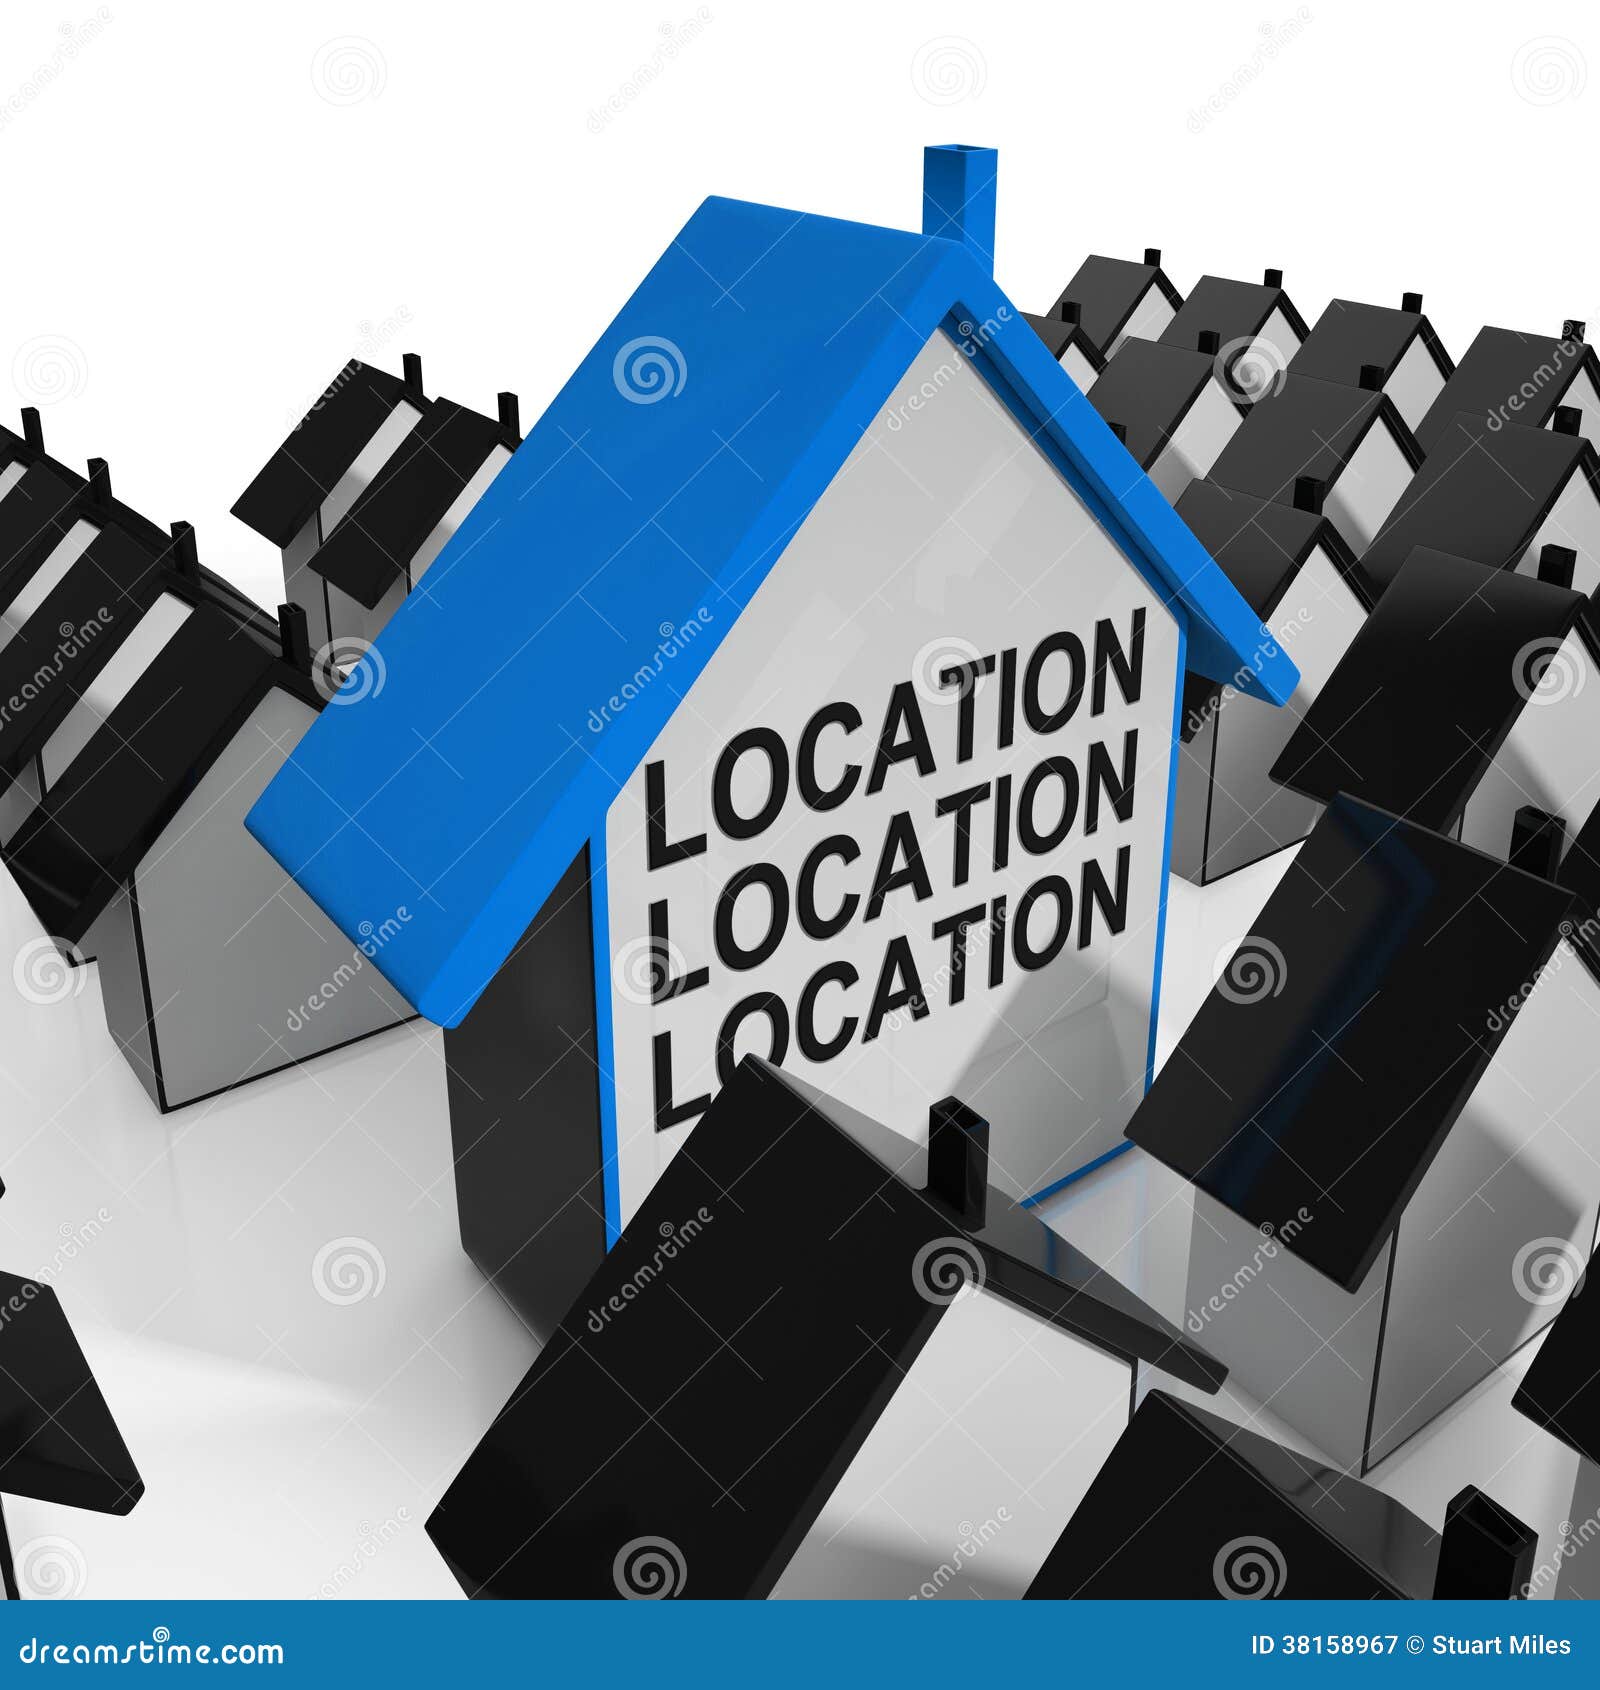 location location location house means situated